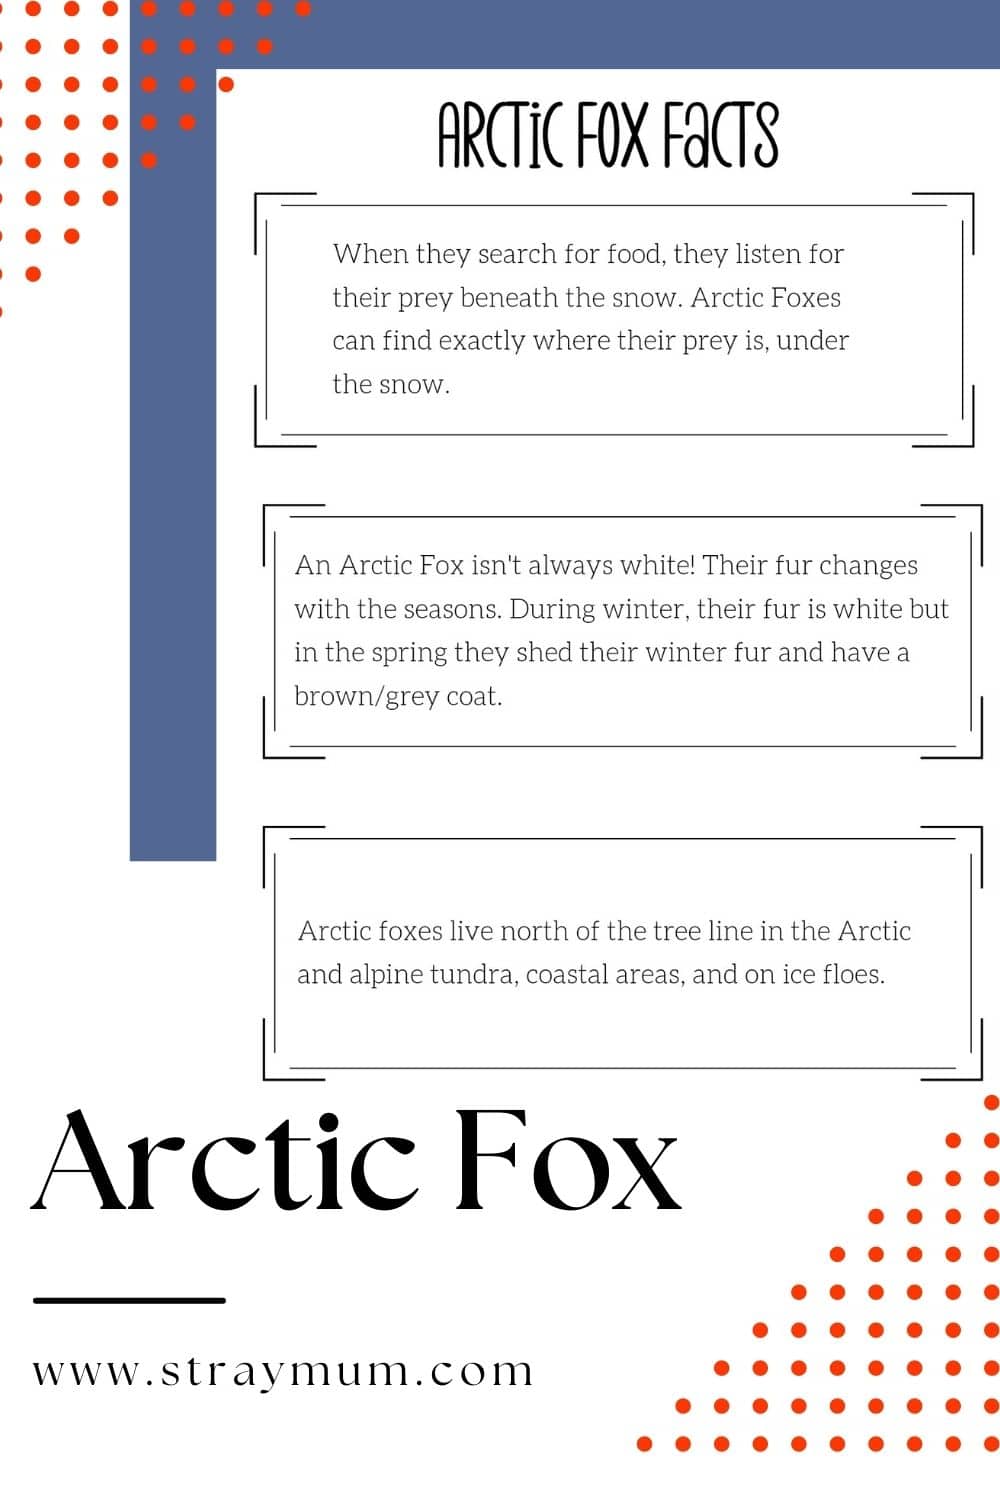 Cool facts about arctic foxes